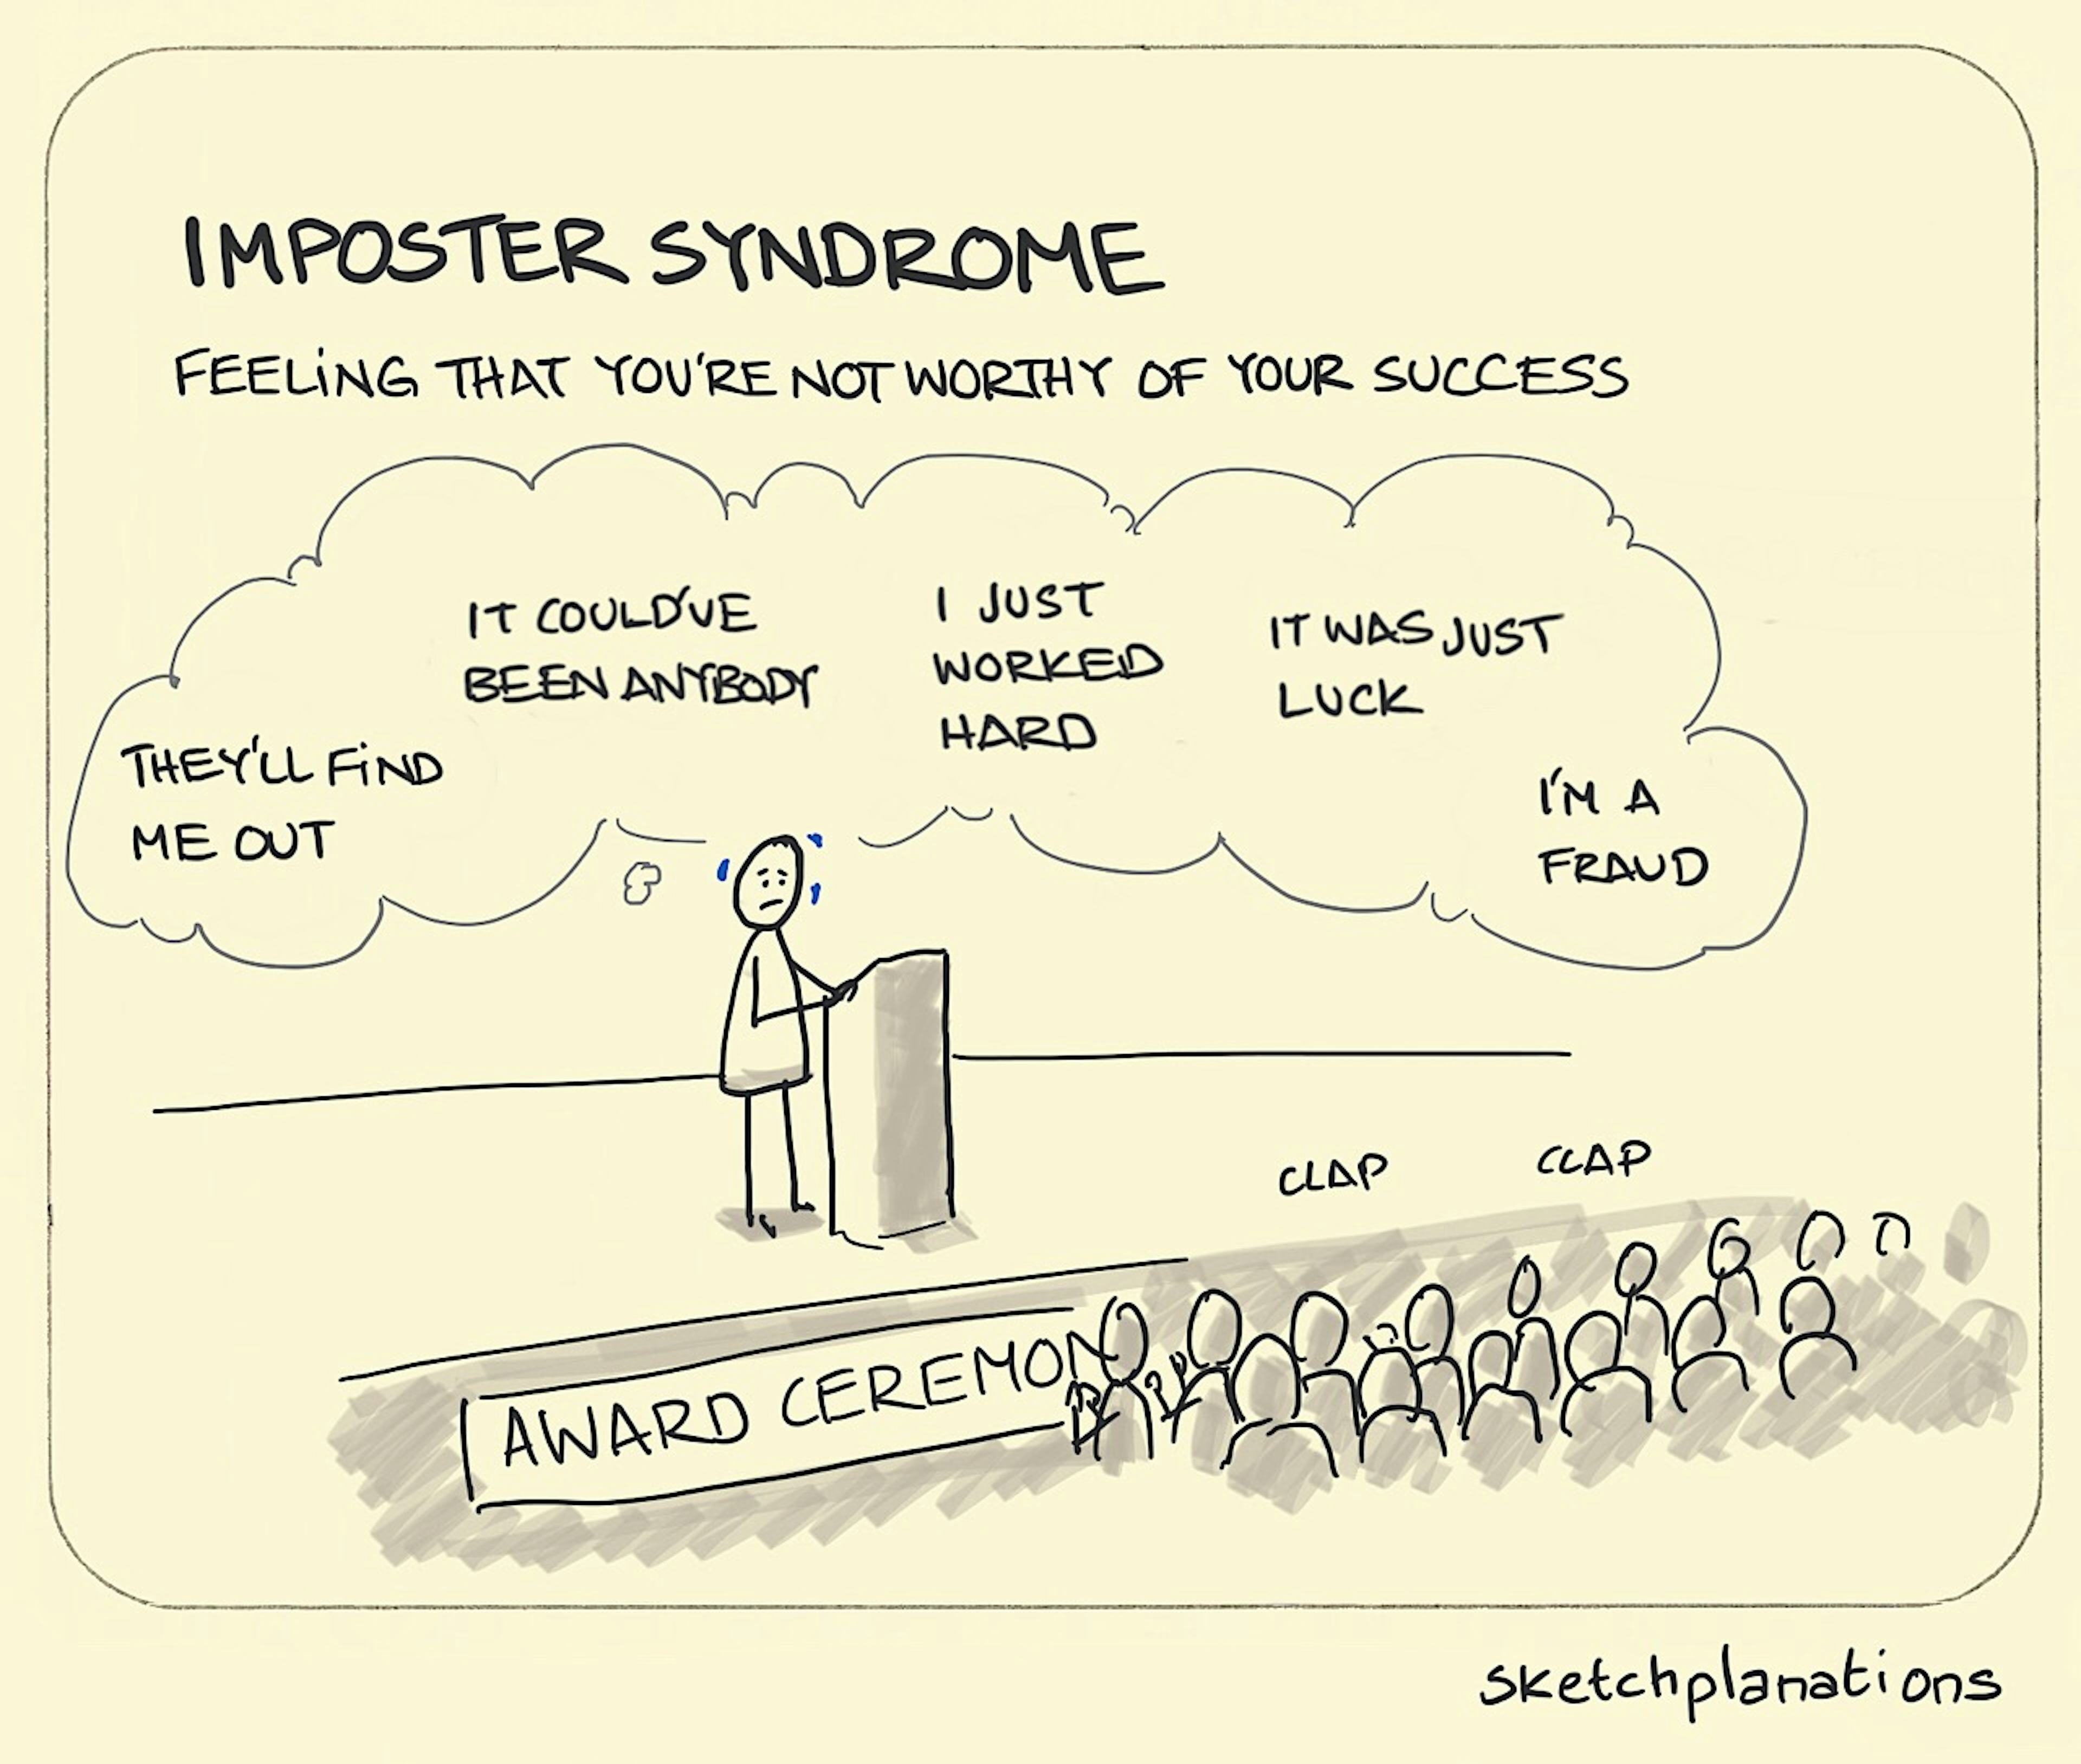 Imposter Syndrome illustration: even as an appreciative audience applaud, an award recipient at the rostrum on stage questions whether they actually deserve this recognition. 